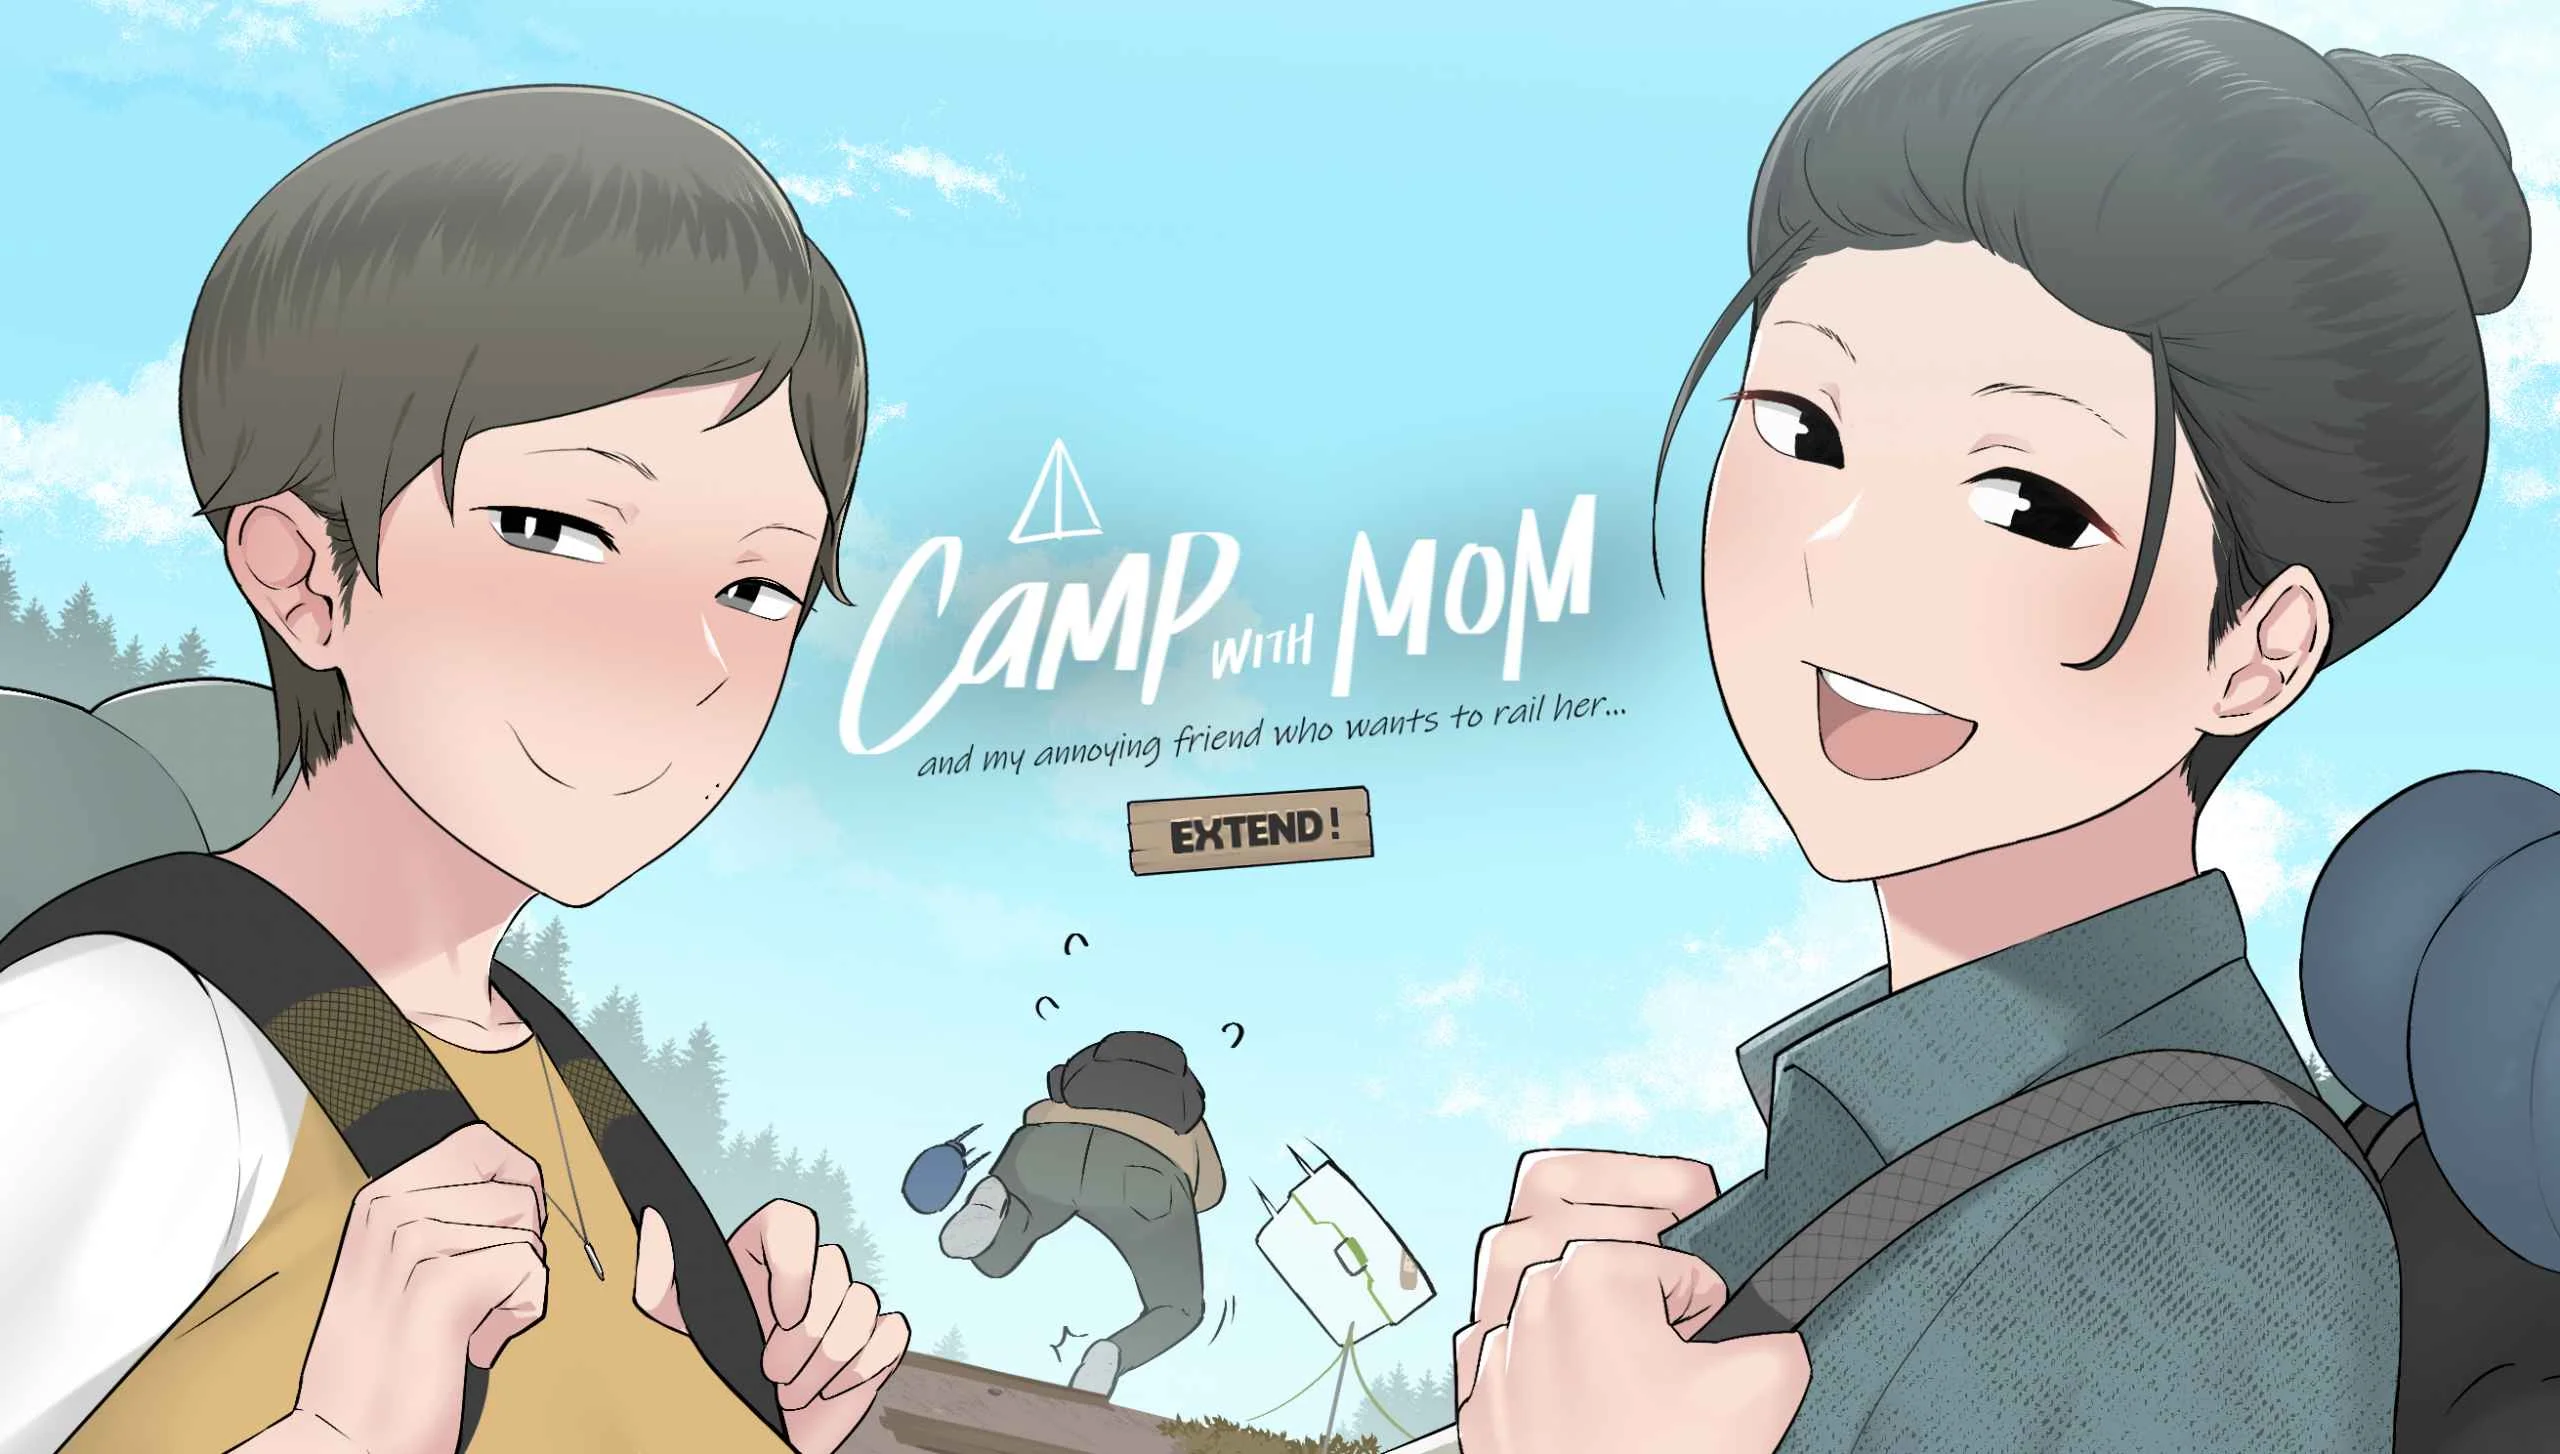 A Camp with Mom Extend